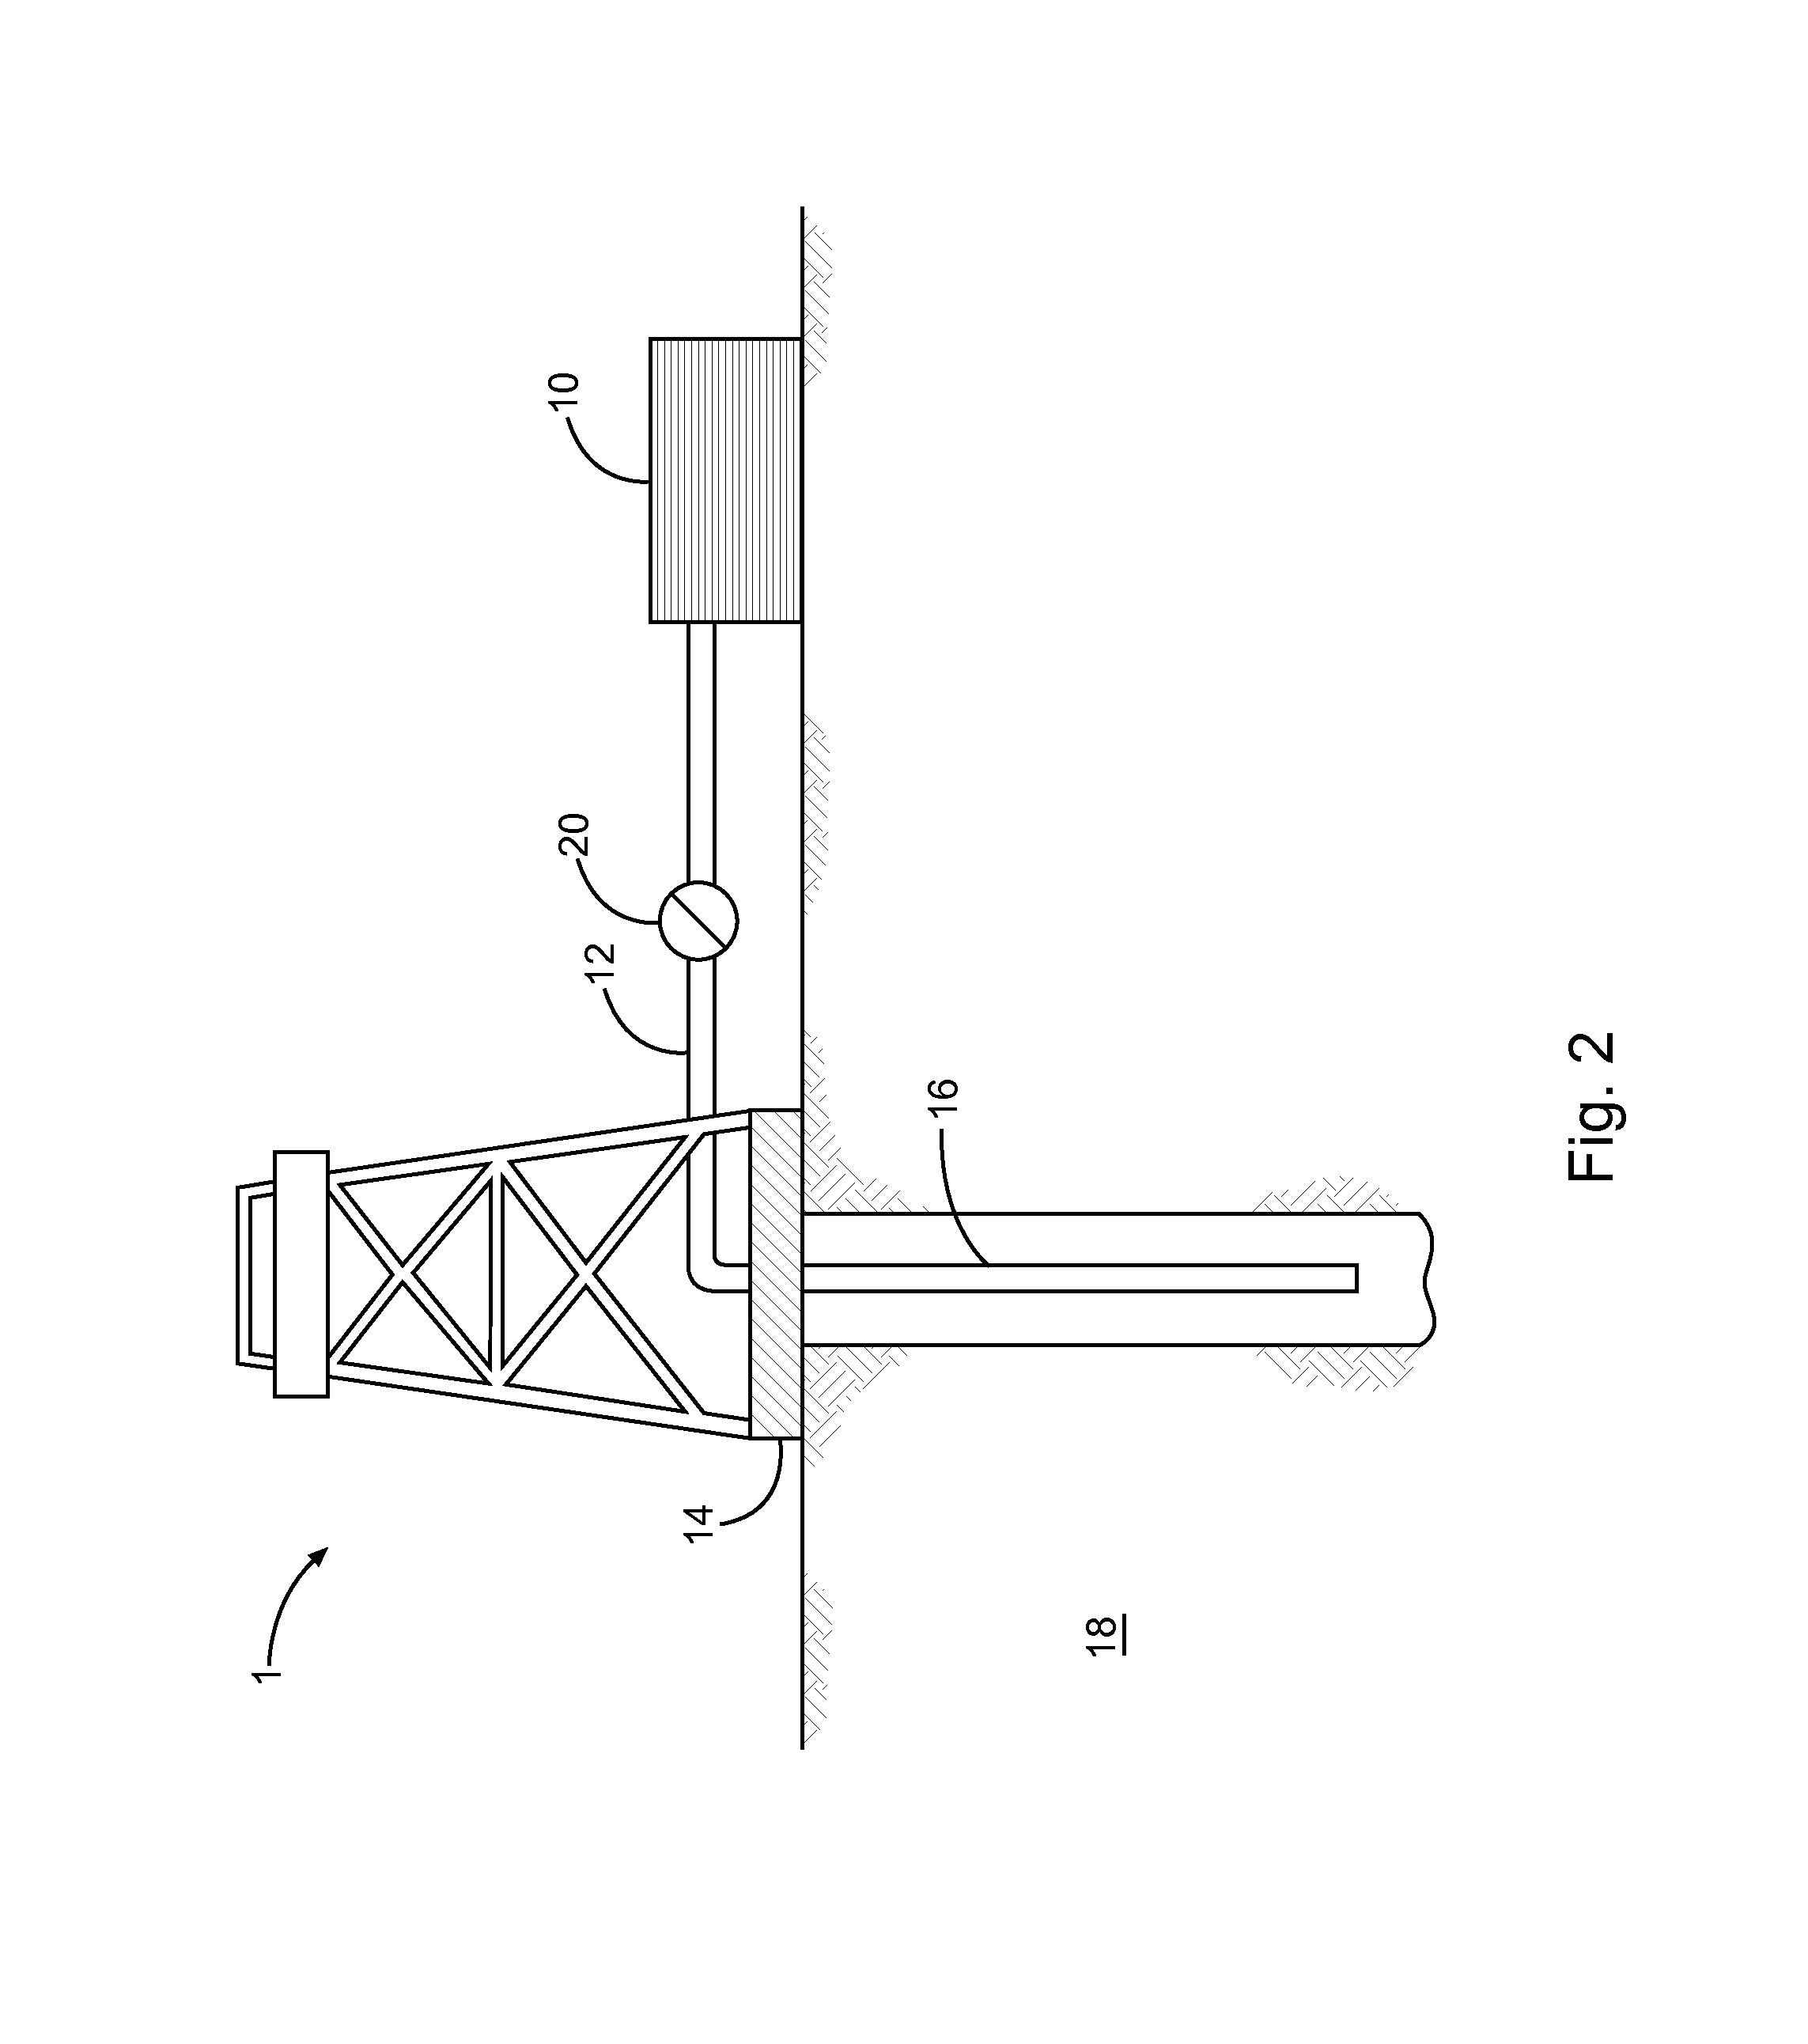 Compositions providing consolidation and water-control